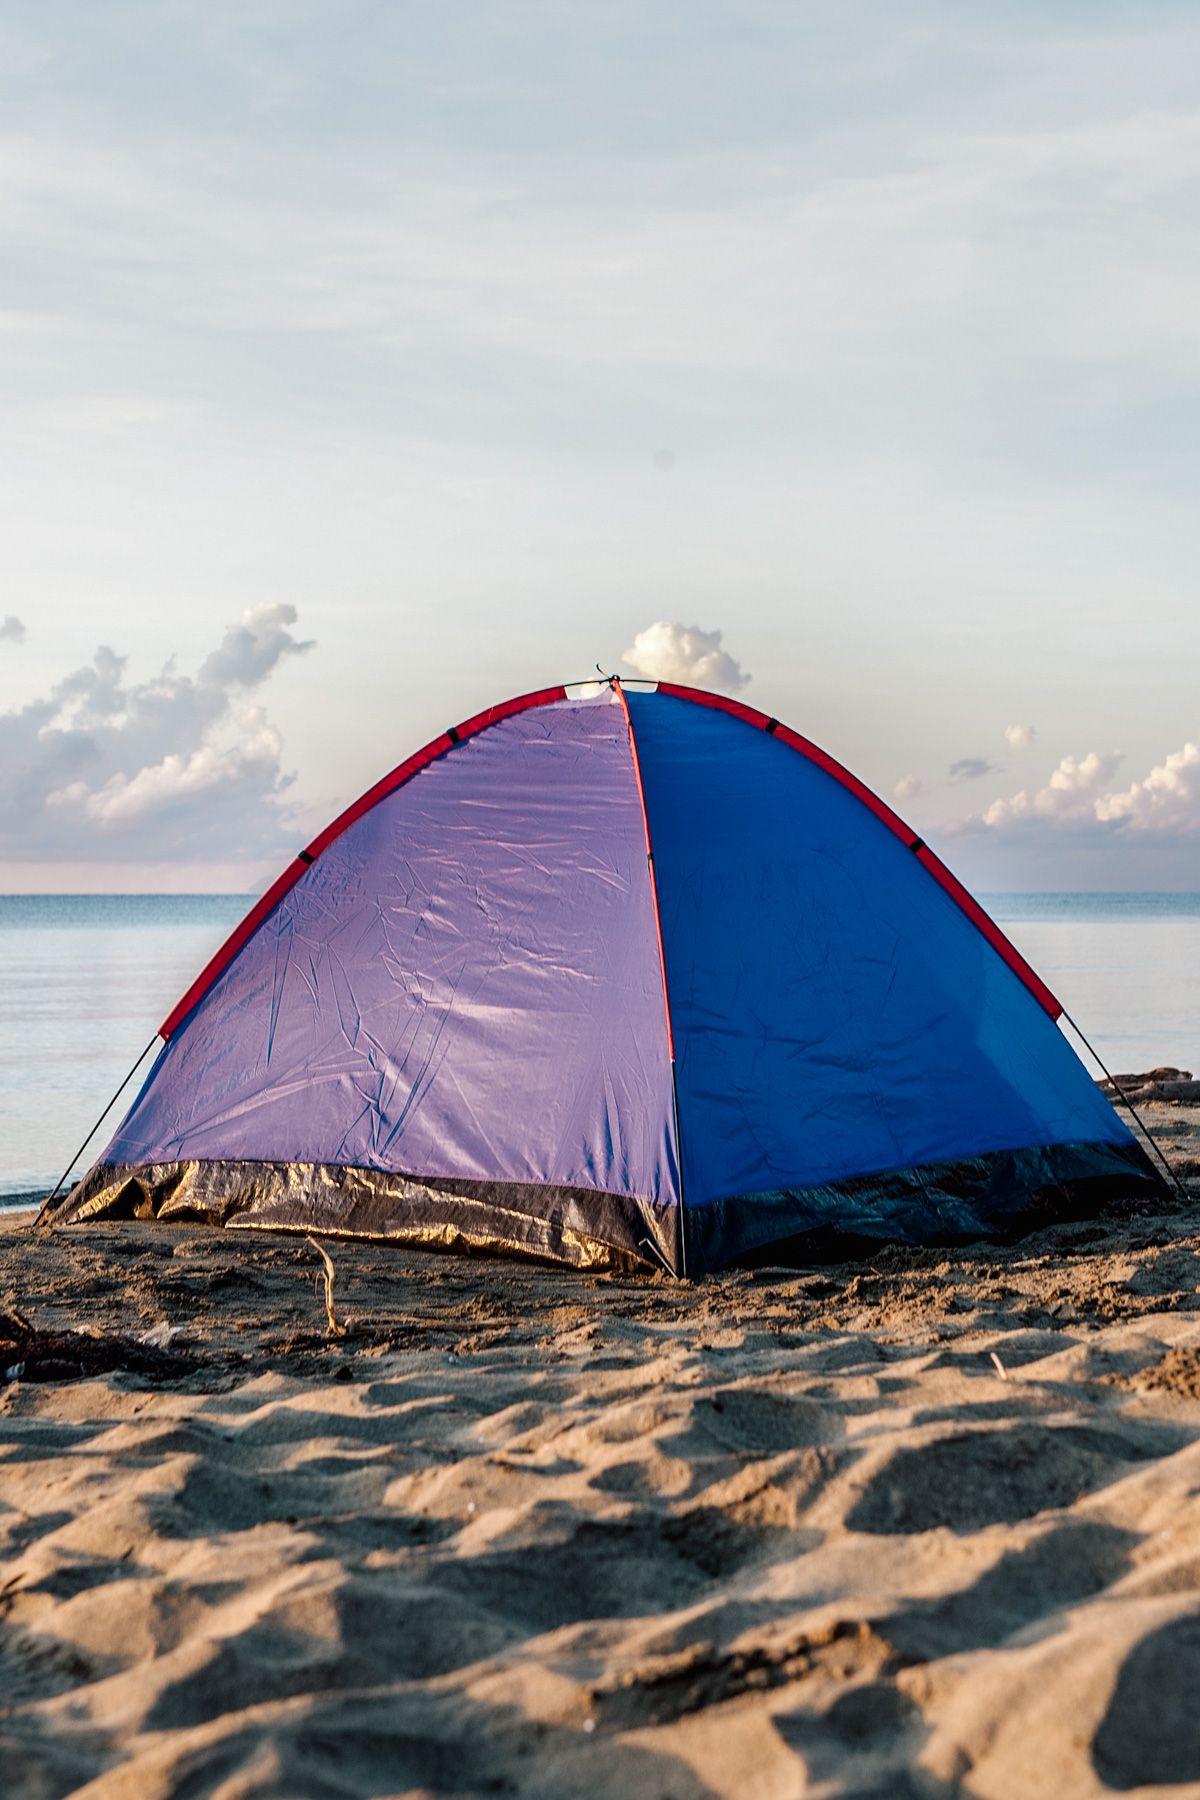 A blue and purple tent on a sandy beach with a calm sea and a partly cloudy sky in the background.